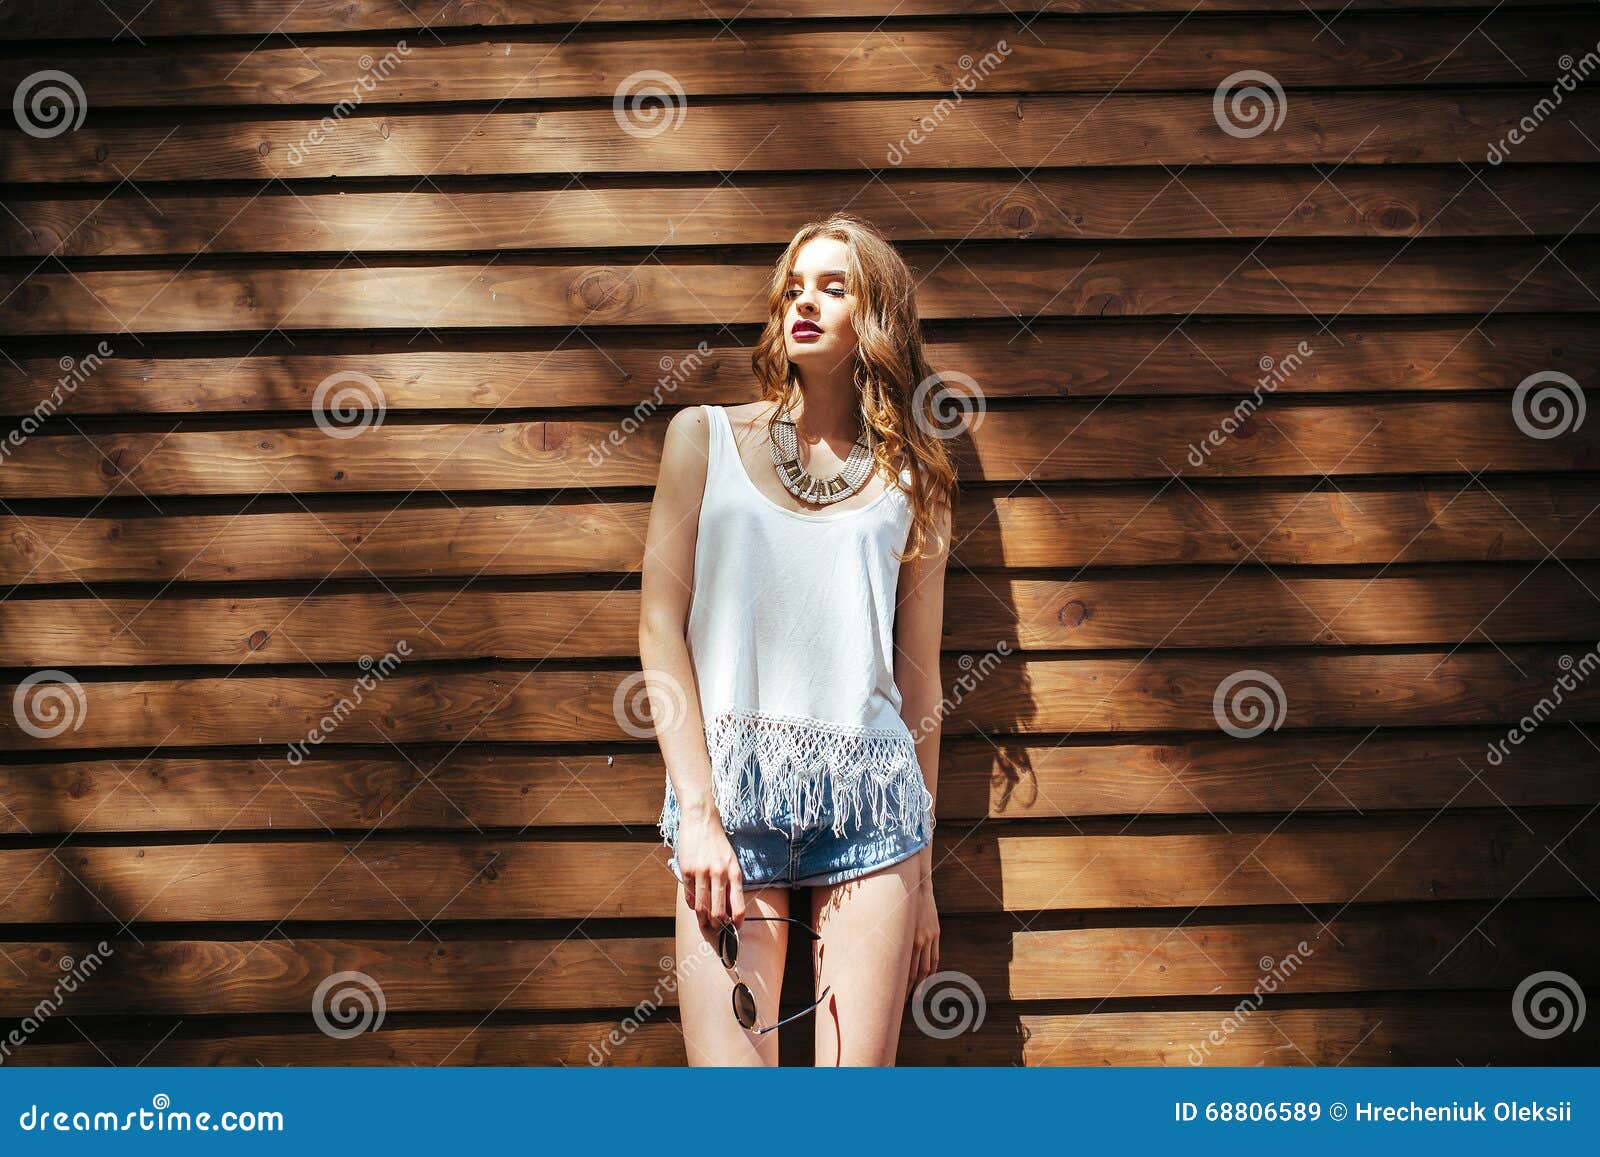 beautiful girl poses for camera in the city stock photo (160632) -  YouWorkForThem